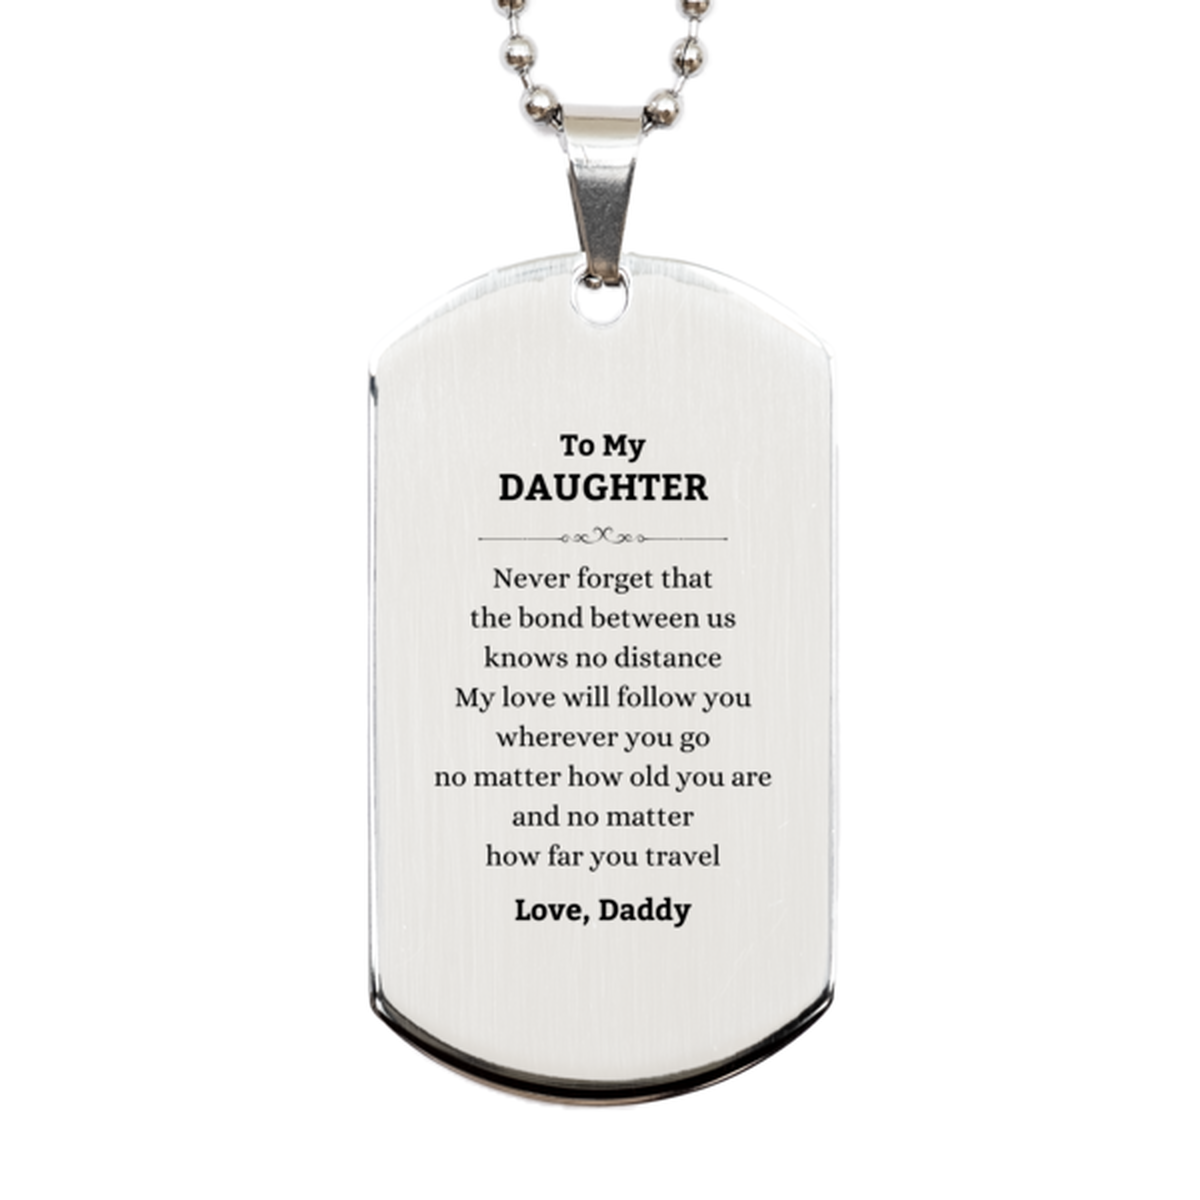 Daughter Birthday Gifts from Daddy, Adjustable Silver Dog Tag for Daughter Christmas Graduation Unique Gifts Daughter Never forget that the bond between us knows no distance. Love, Daddy